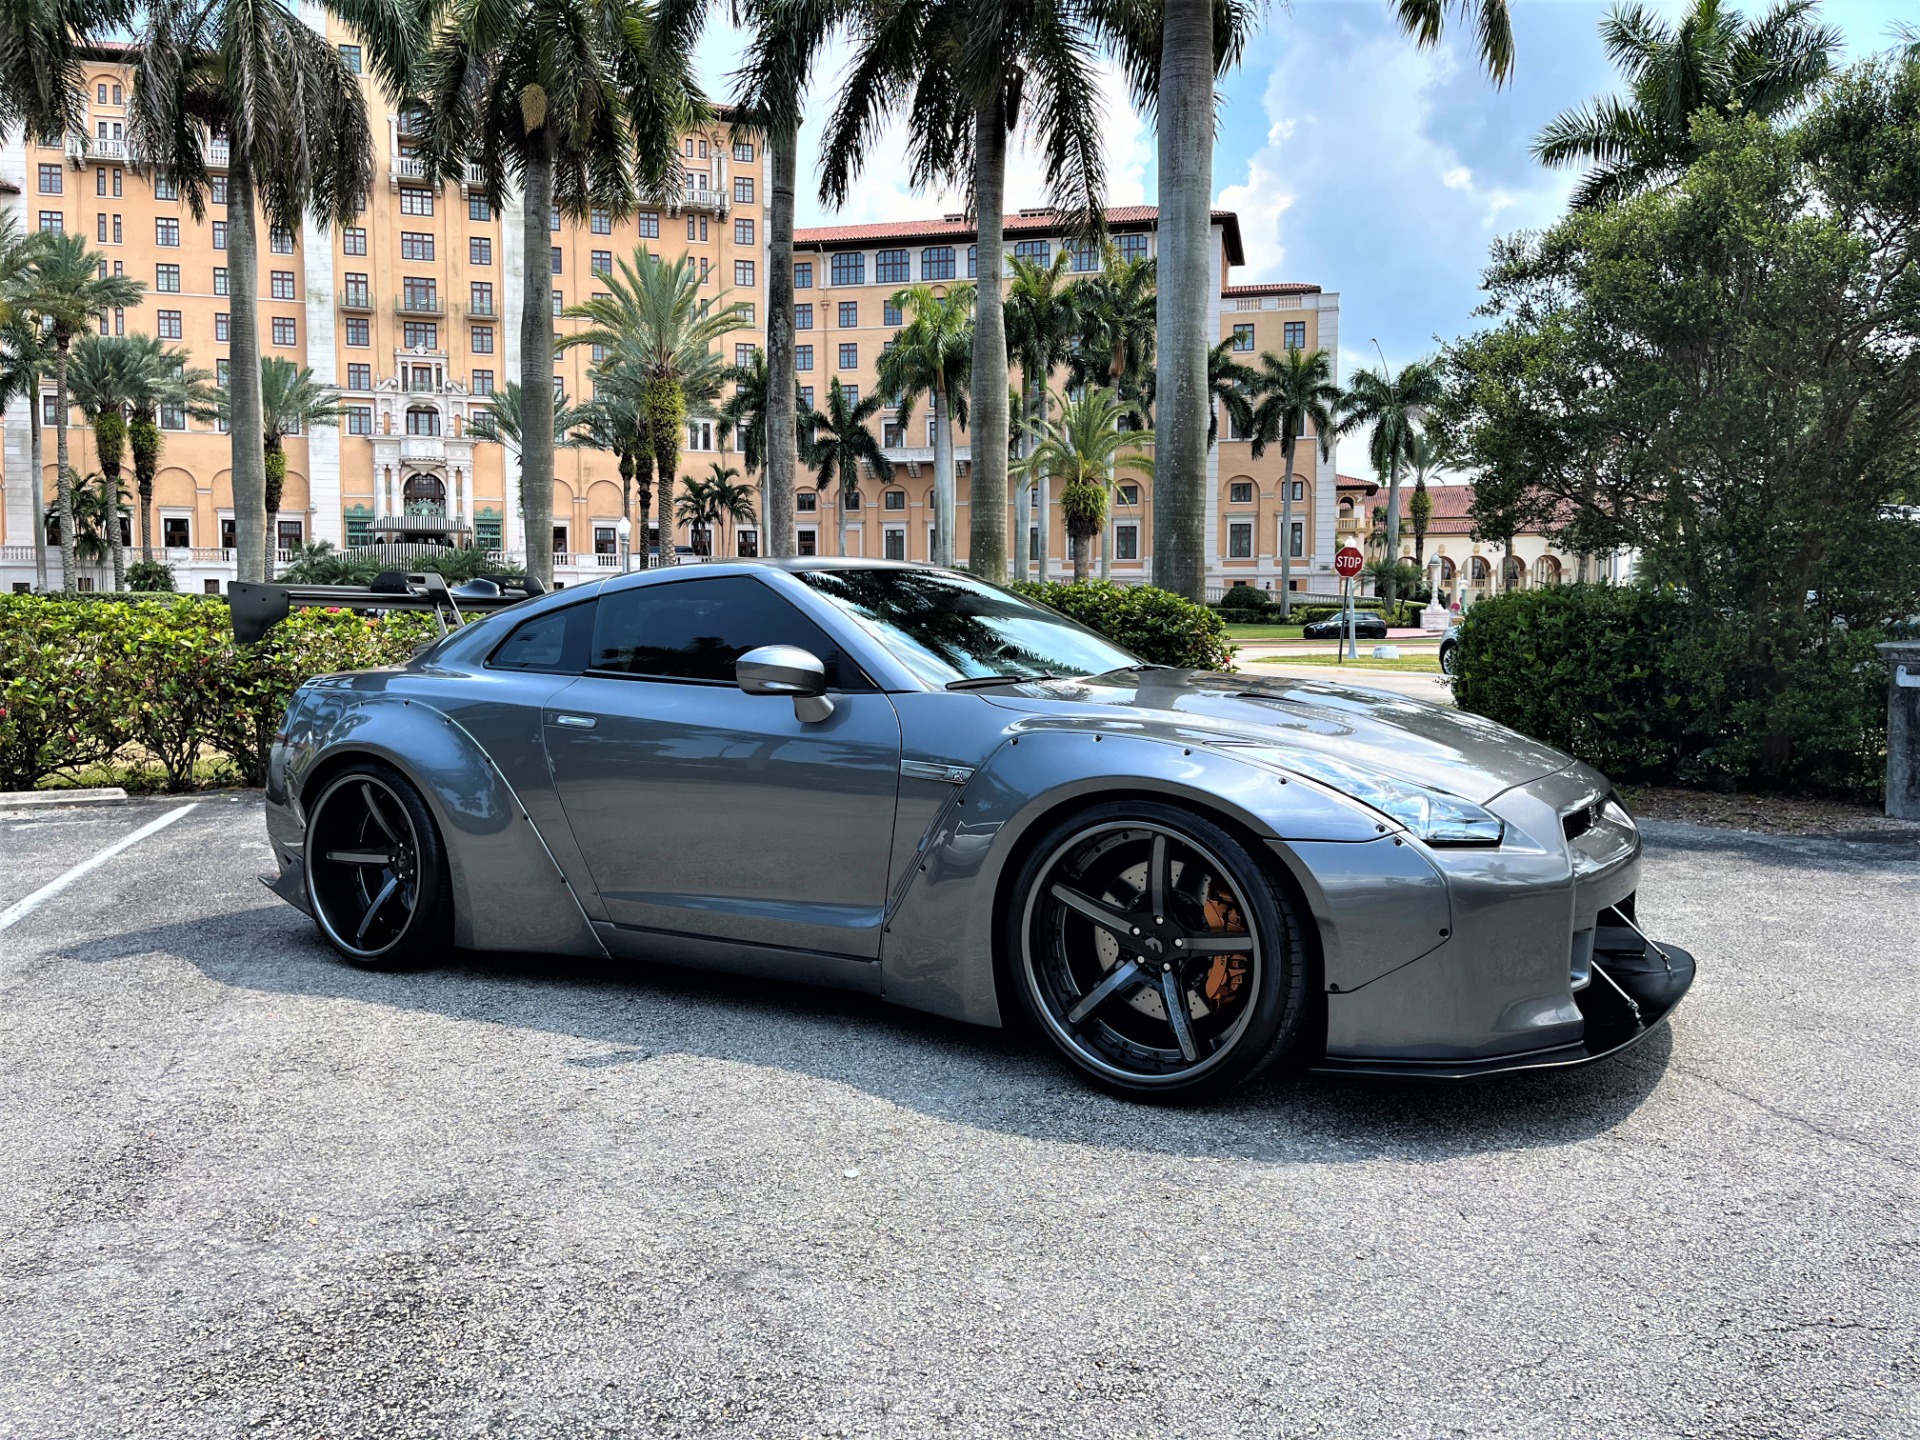 Used 2014 Nissan GT-R Track Edition for sale $149,850 at The Gables Sports Cars in Miami FL 33146 1